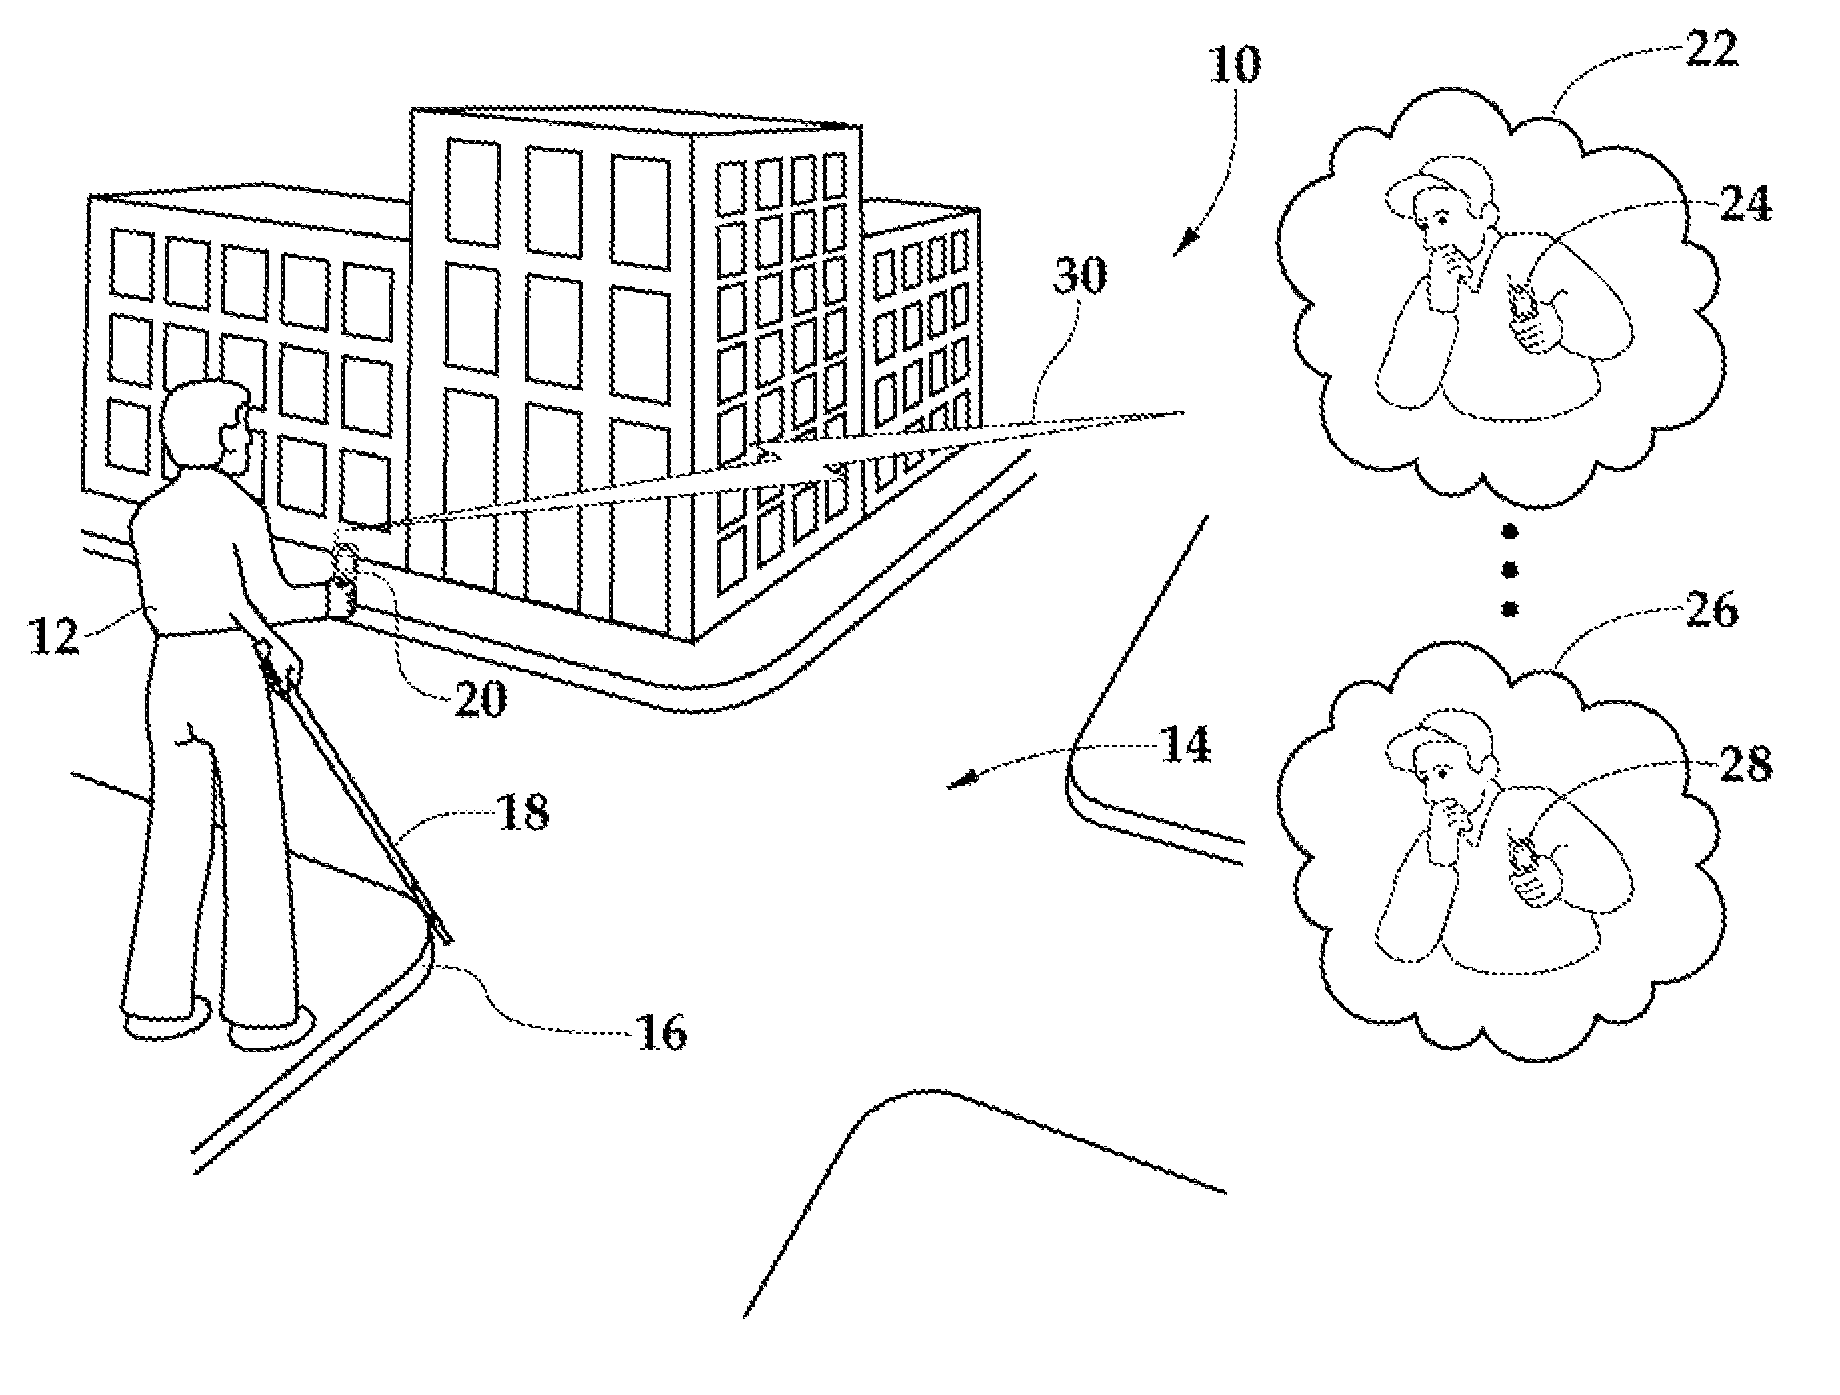 System and method for assisting a visually impaired individual